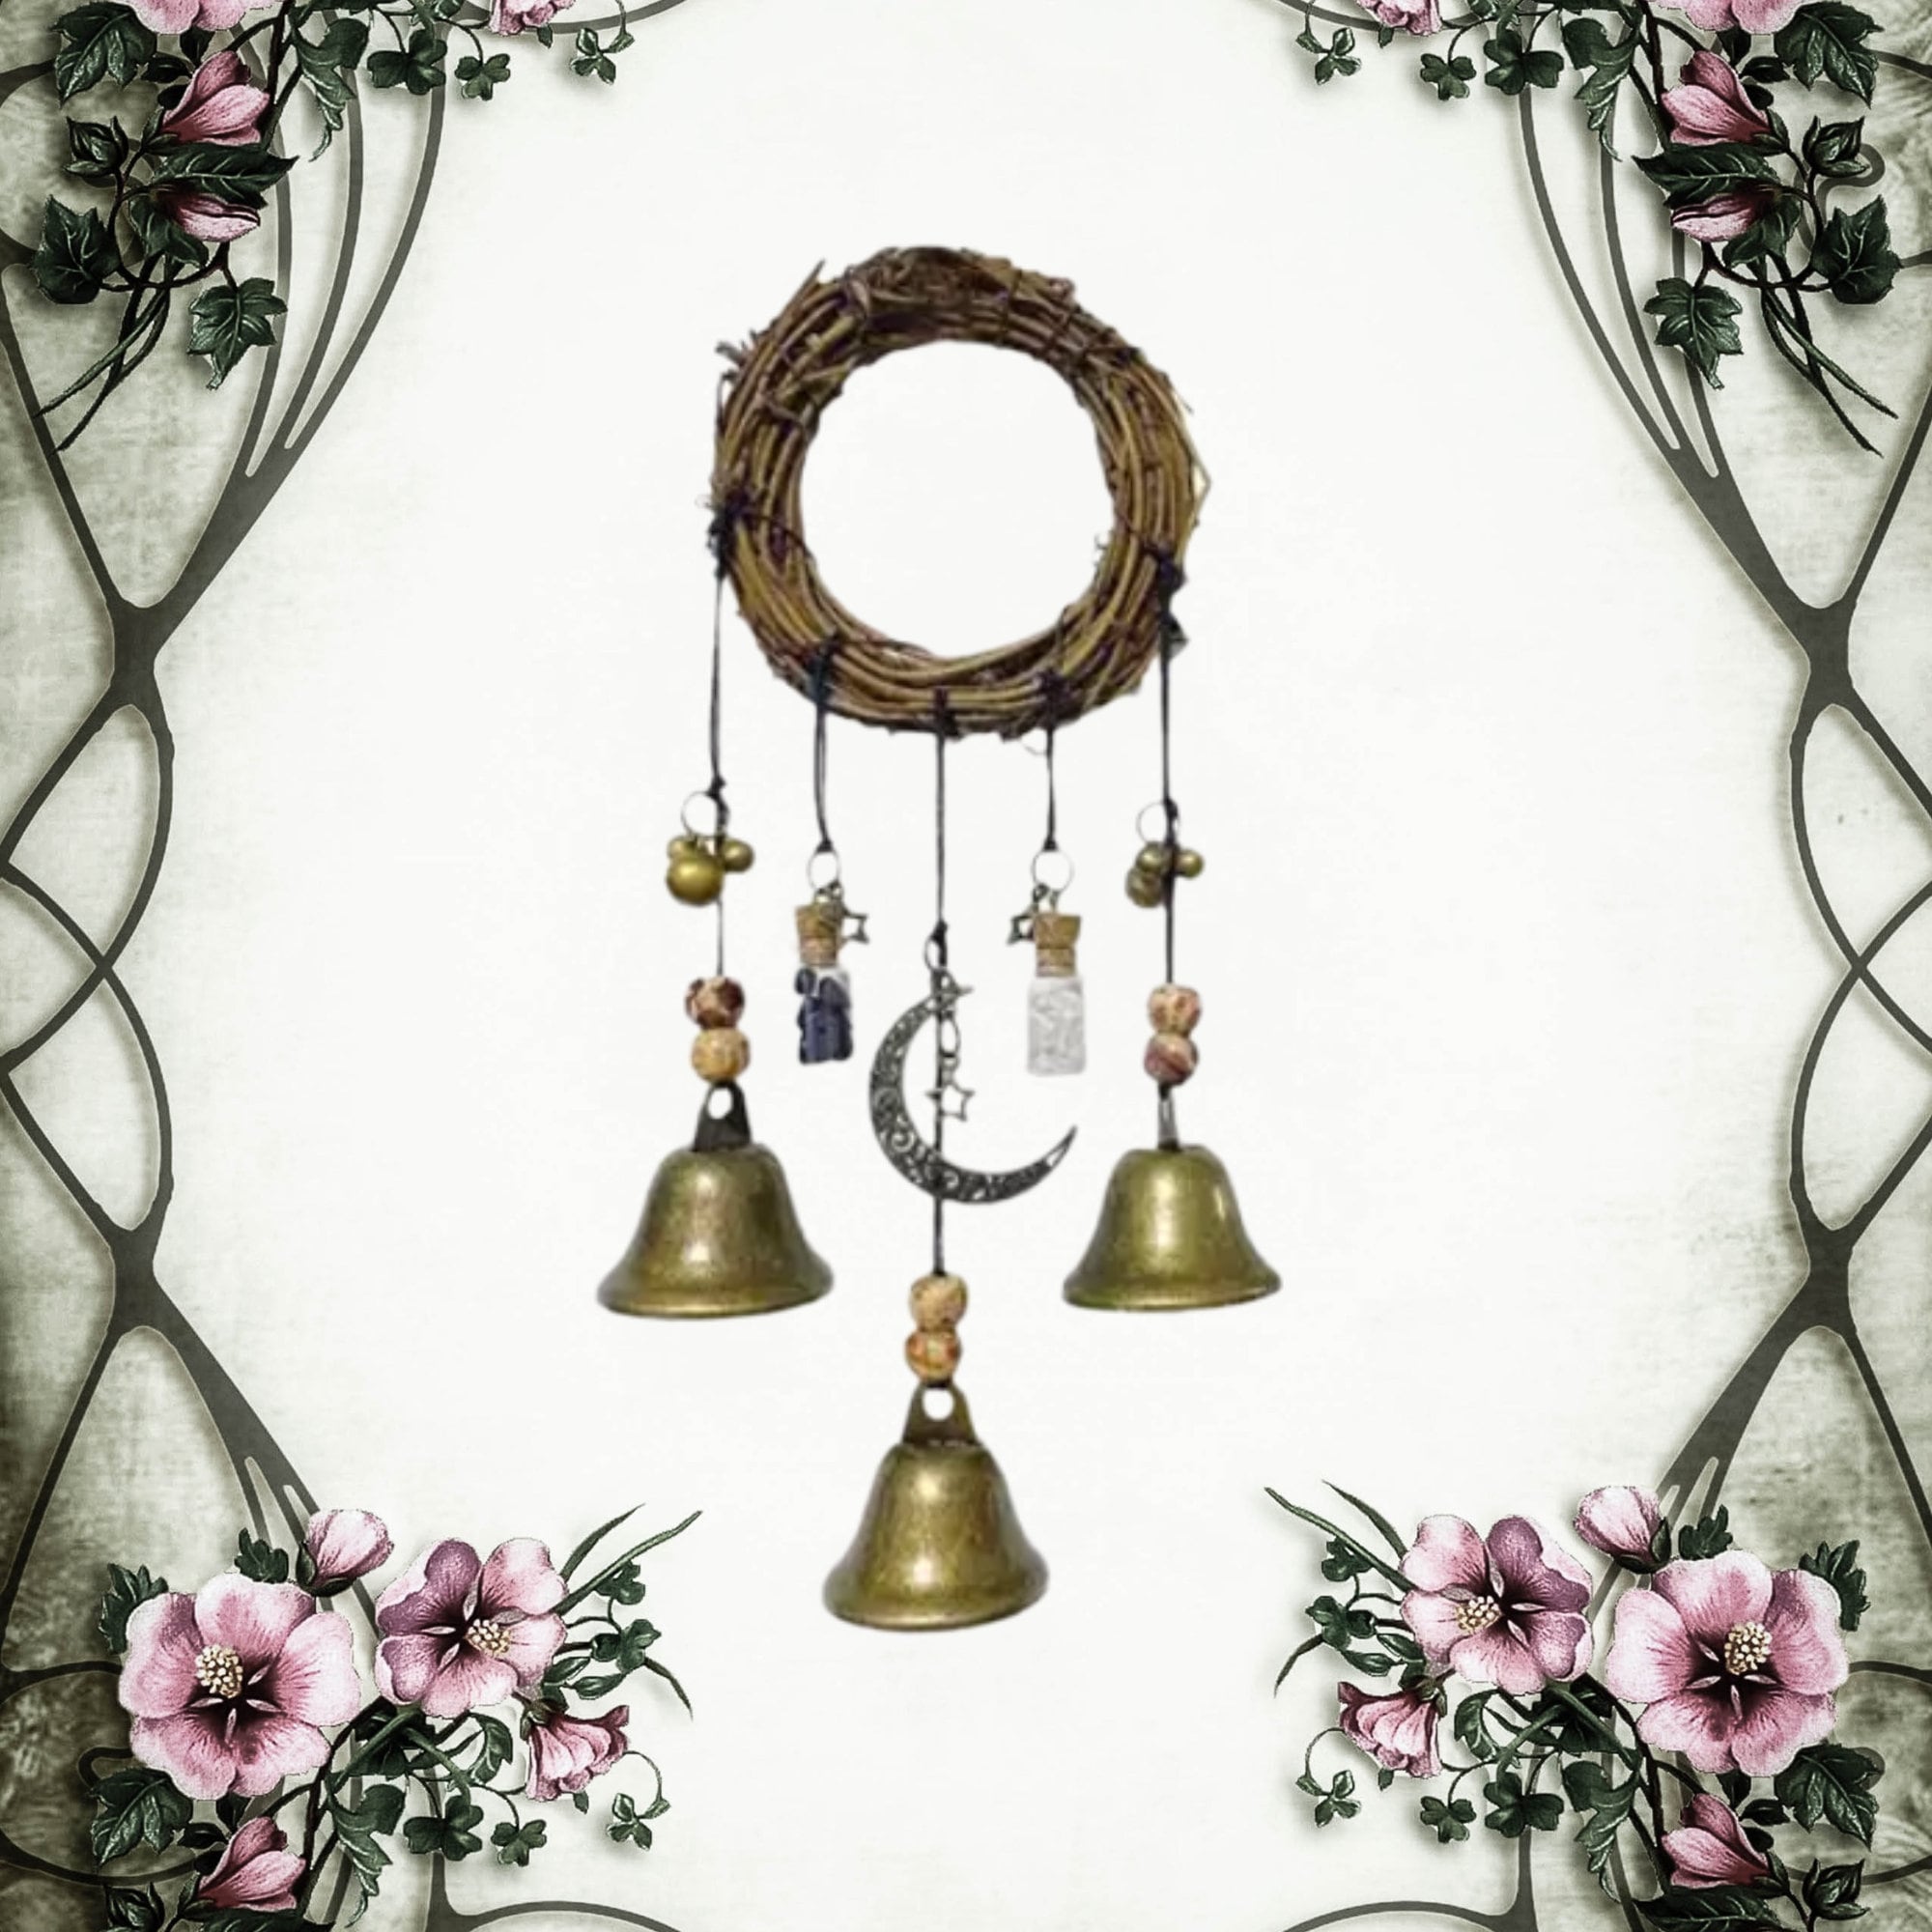 Witches Bells Doorknob Wreath – The Jagged Path